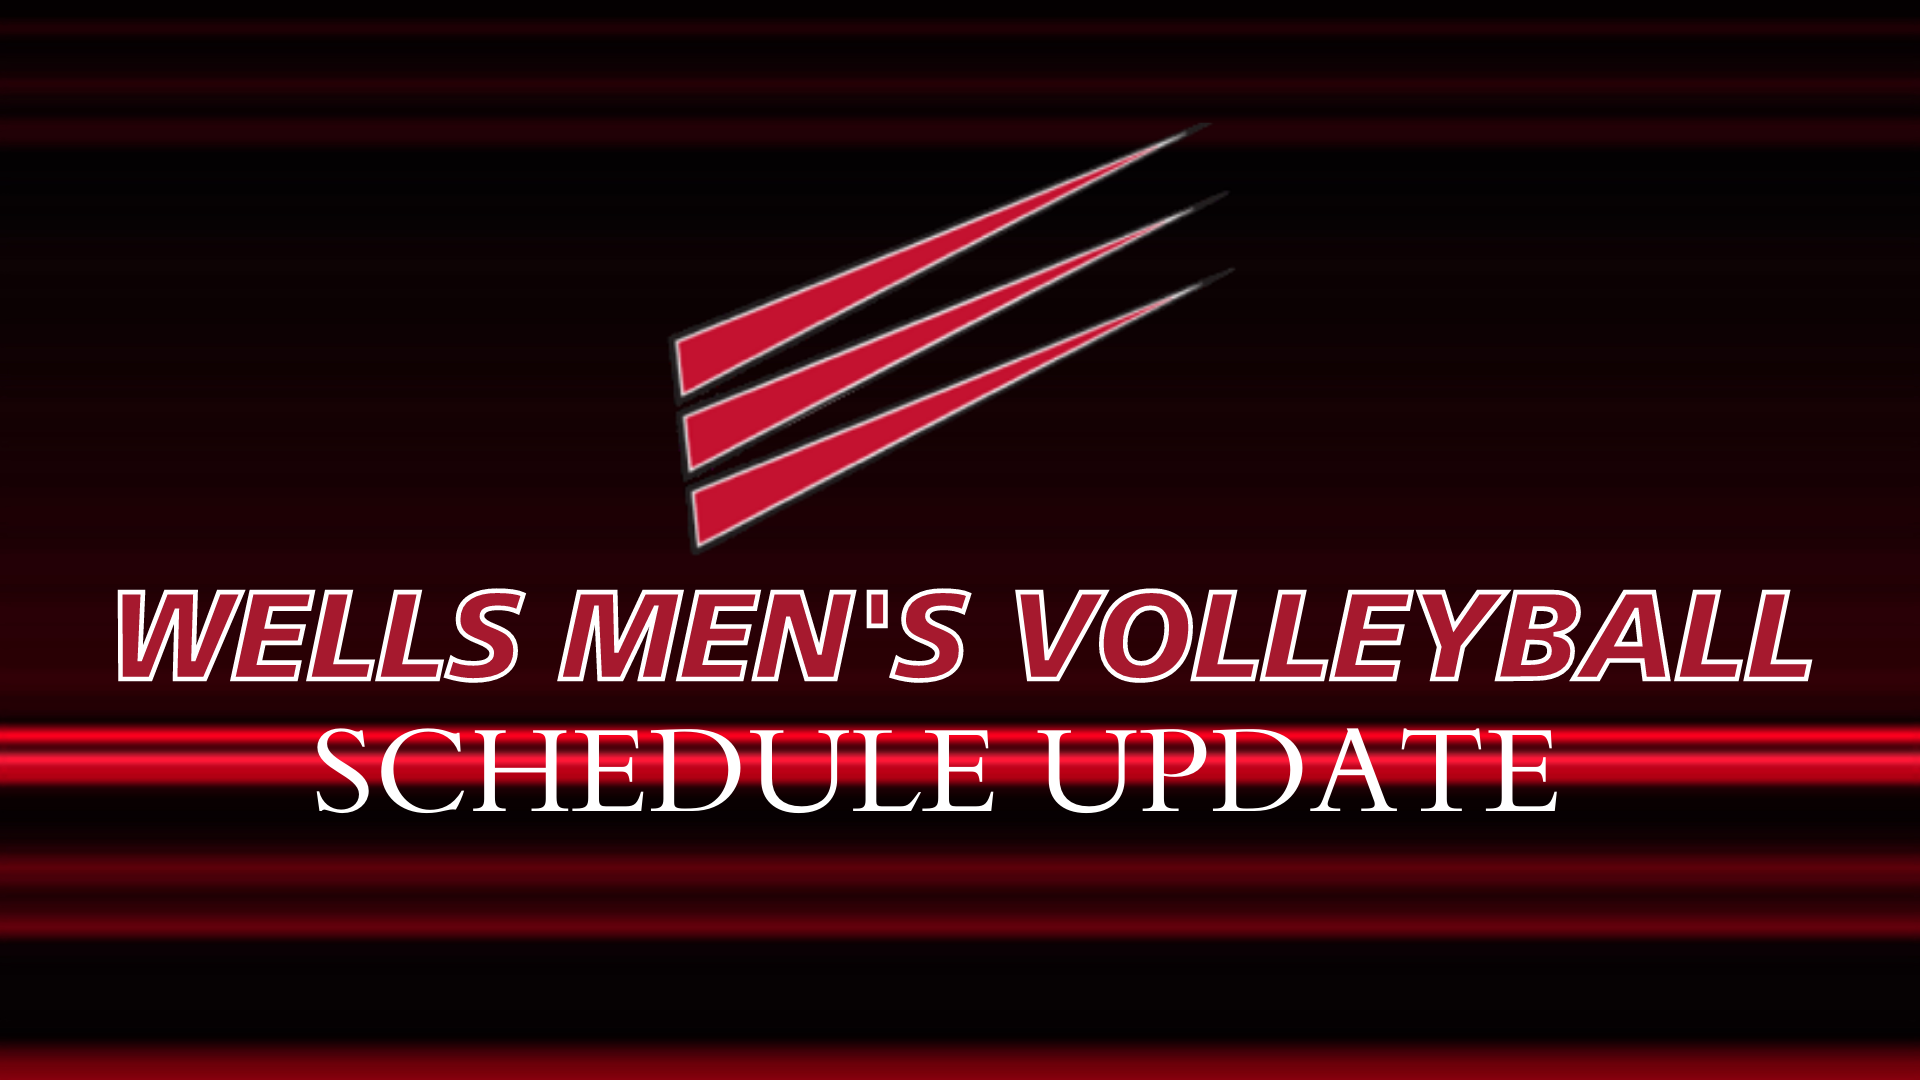 Men's Volleyball Weekend Cancelled